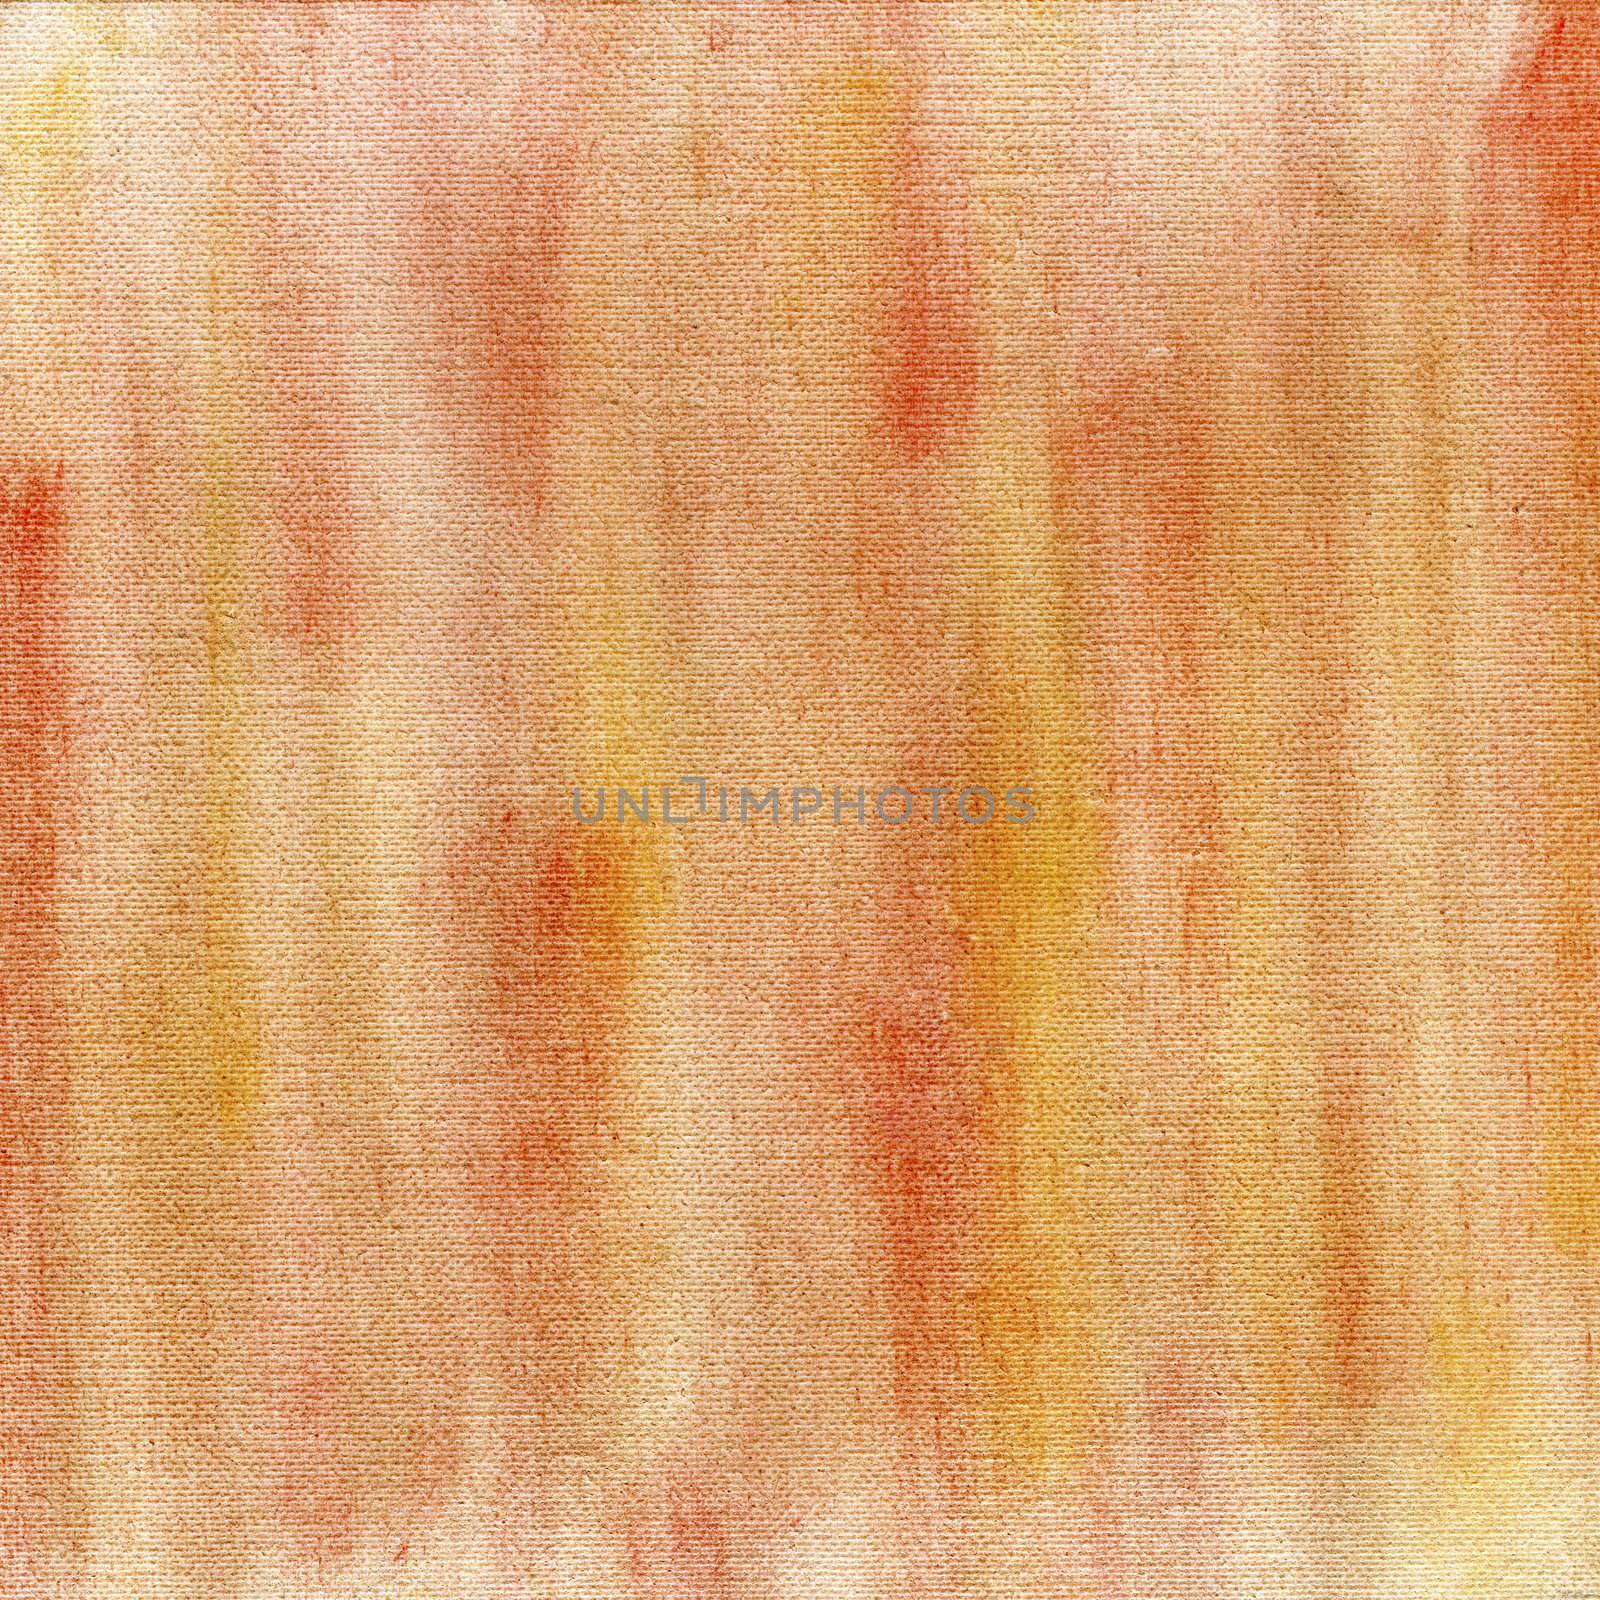 red and yellow crayon pastel background by PixelsAway